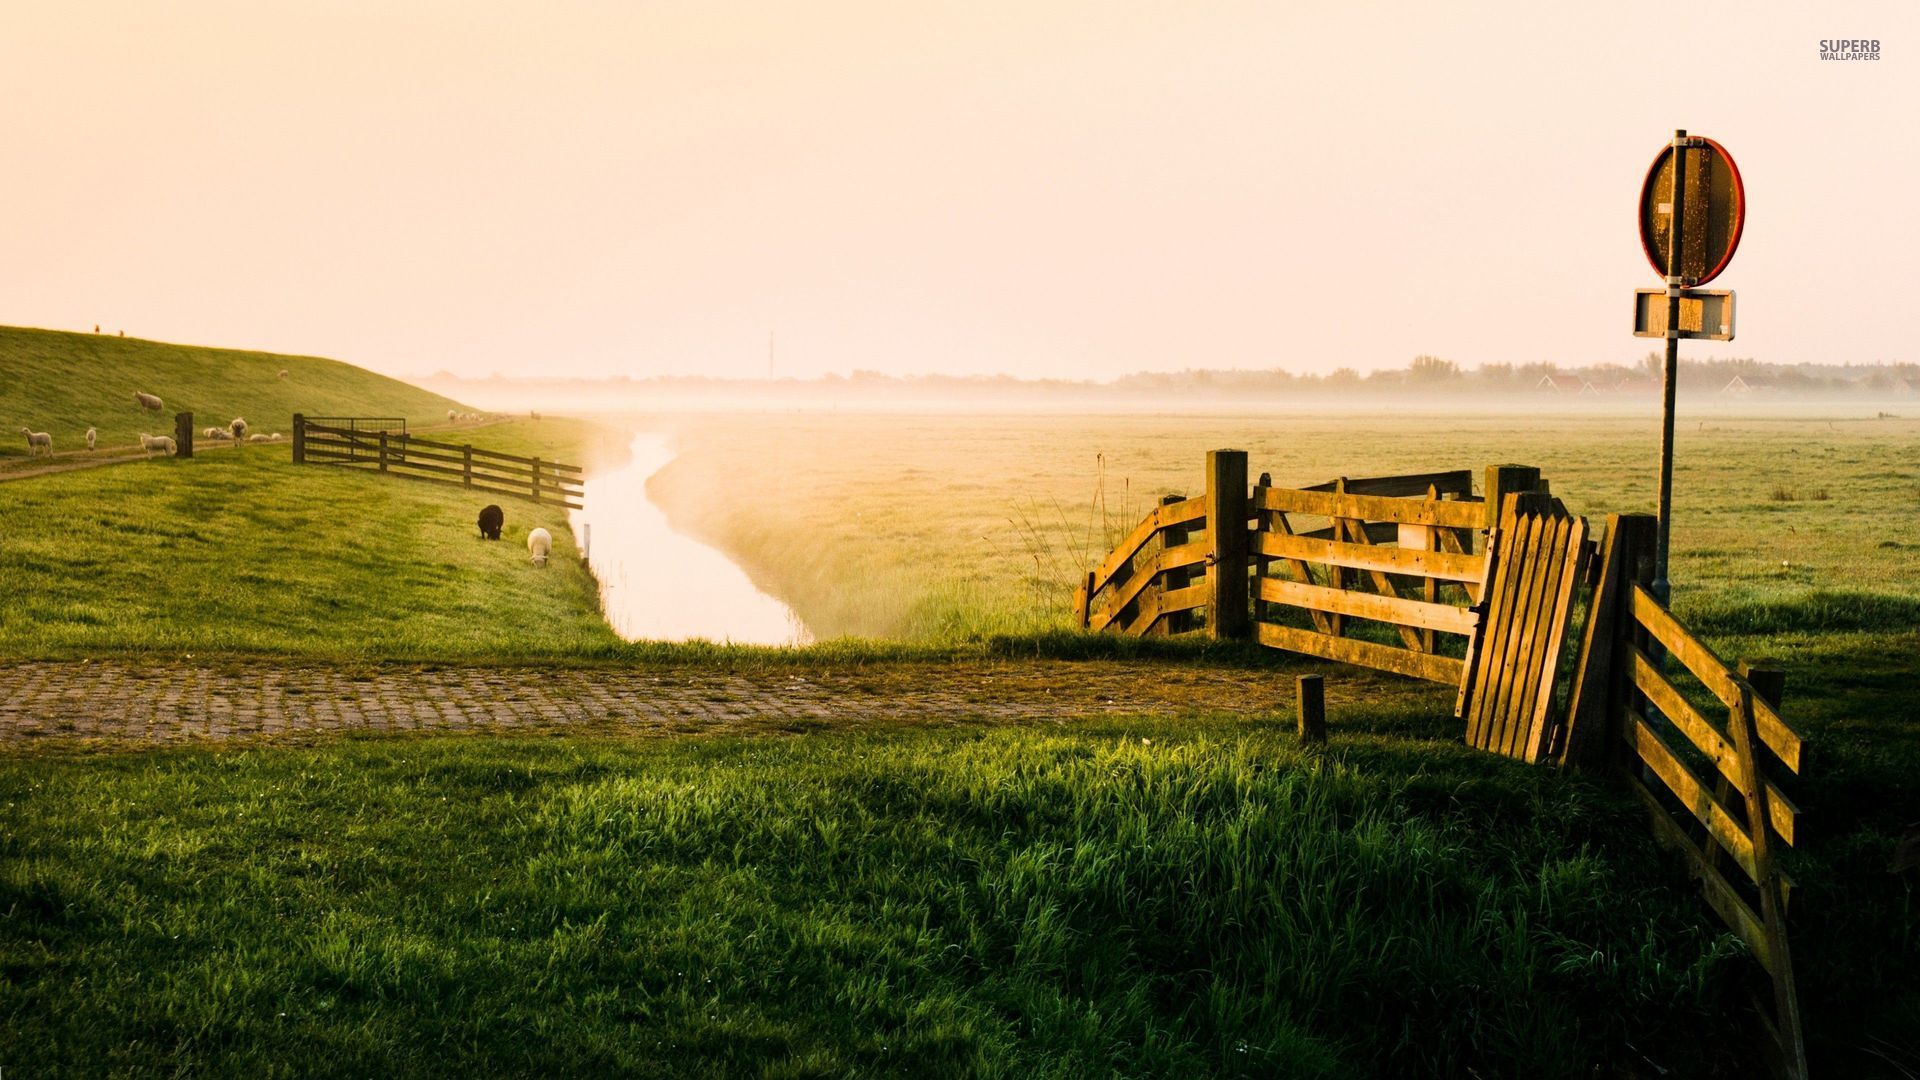 Countryside wallpaper   Photography wallpapers